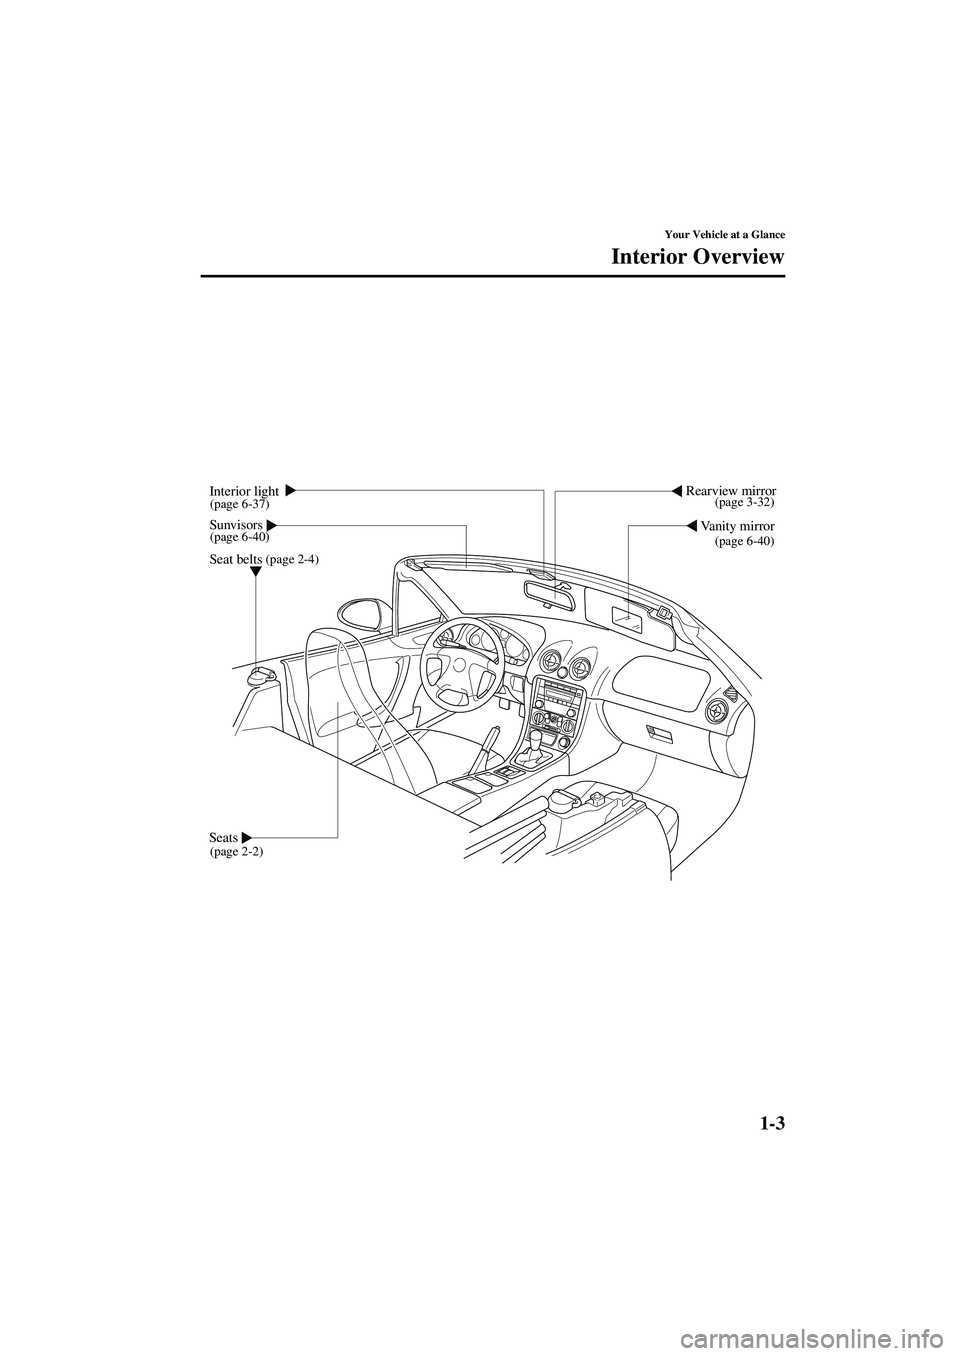 MAZDA MODEL MX-5 MIATA 2002  Owners Manual 1-3
Your Vehicle at a Glance
Form No. 8Q42-EA-01F
Interior Overview
Vanity mirror
Rearview mirror
Seat beltsInterior light
Sunvisors
Seats
(page 6-37)
(page 6-40) (page 2-4)
(page 2-2) (page 6-40) (pa